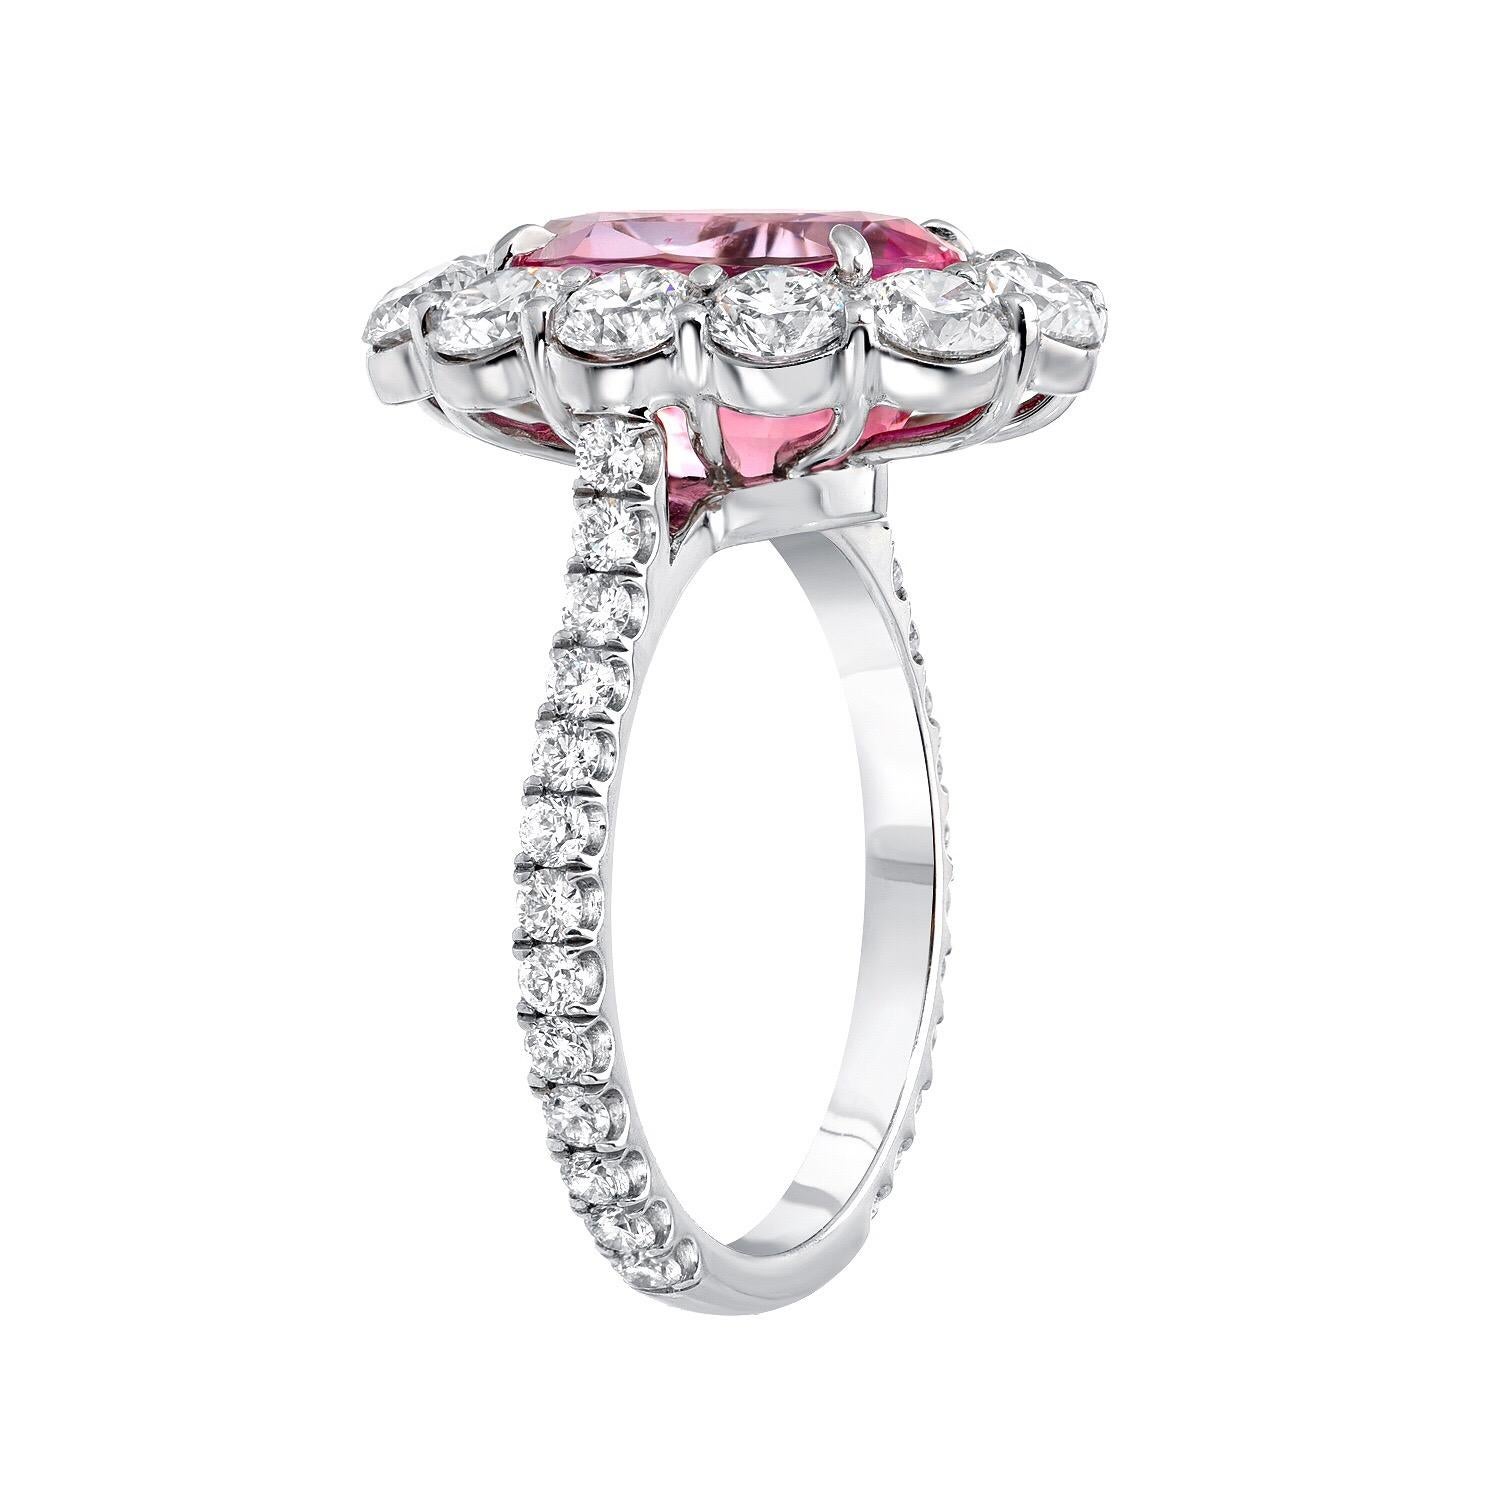 Spectacular 5.55 carat GIA certified natural unheated Ceylon Pink Sapphire oval, and 2.37 carat total diamond platinum ring.
Lady Gaga engagement ring style.
GIA certificate is attached.
Size 6. Re-sizing is complimentary upon request.
***Returns